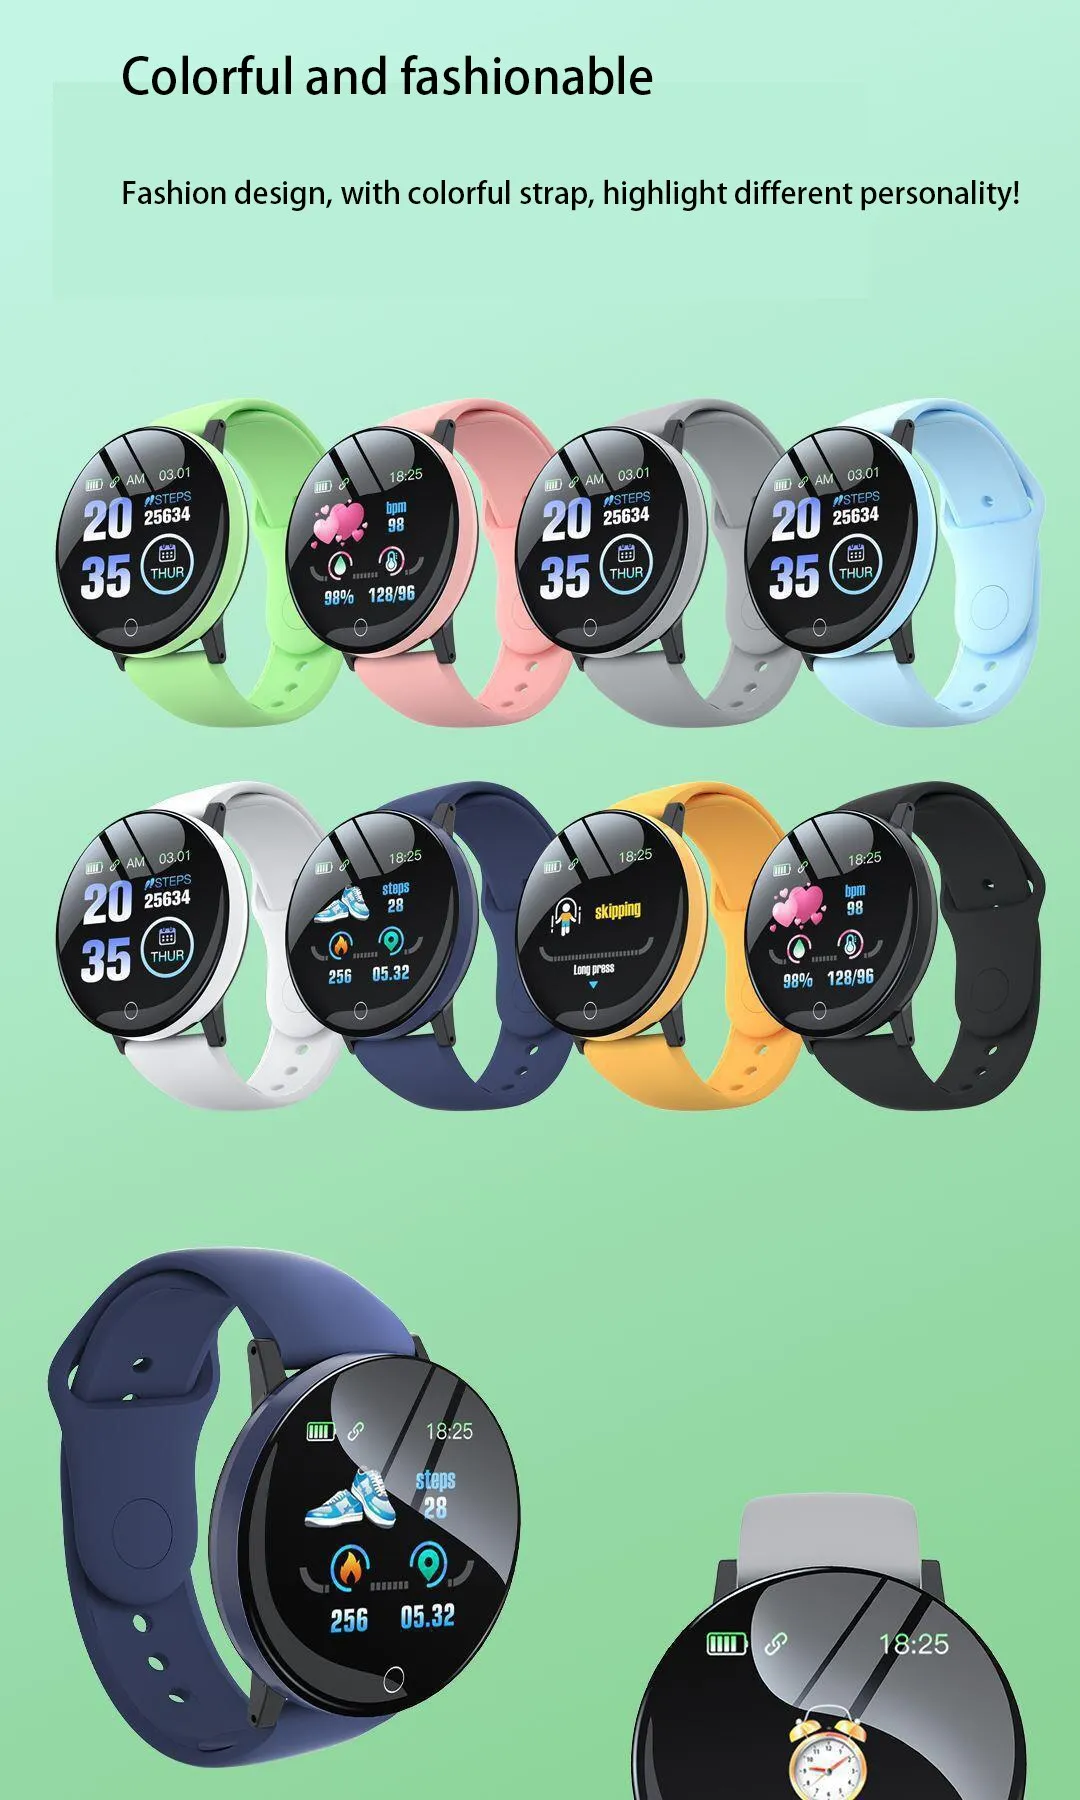 B41 Real Stepcount Smart Watch Multi Function Step Connected Smart Watch For Men And Women Suitable For And Android